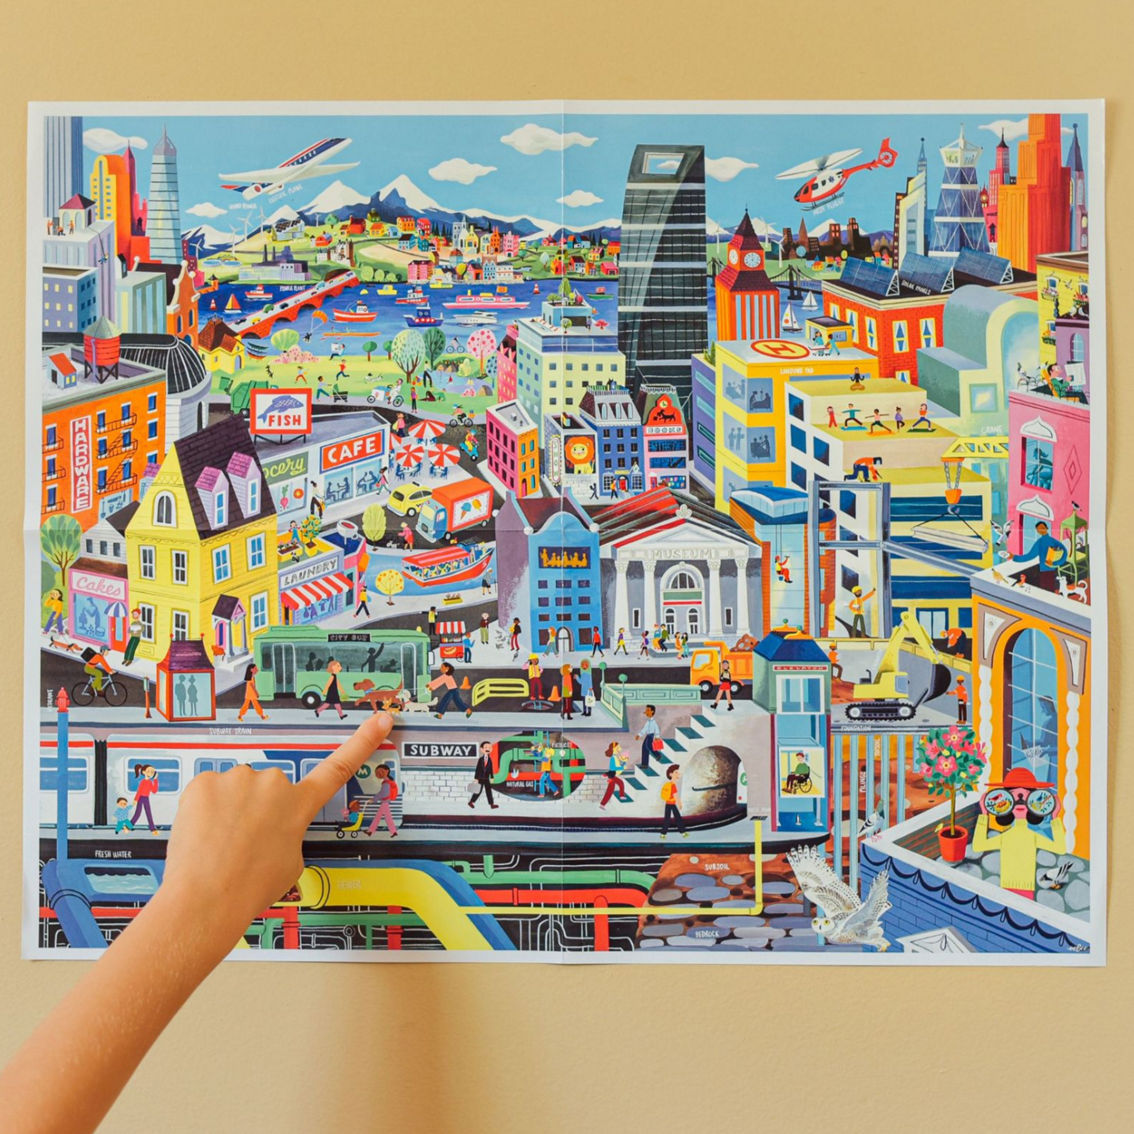 eeBoo Within the City 48 Piece Giant Floor Jigsaw Puzzle - Image 4 of 4